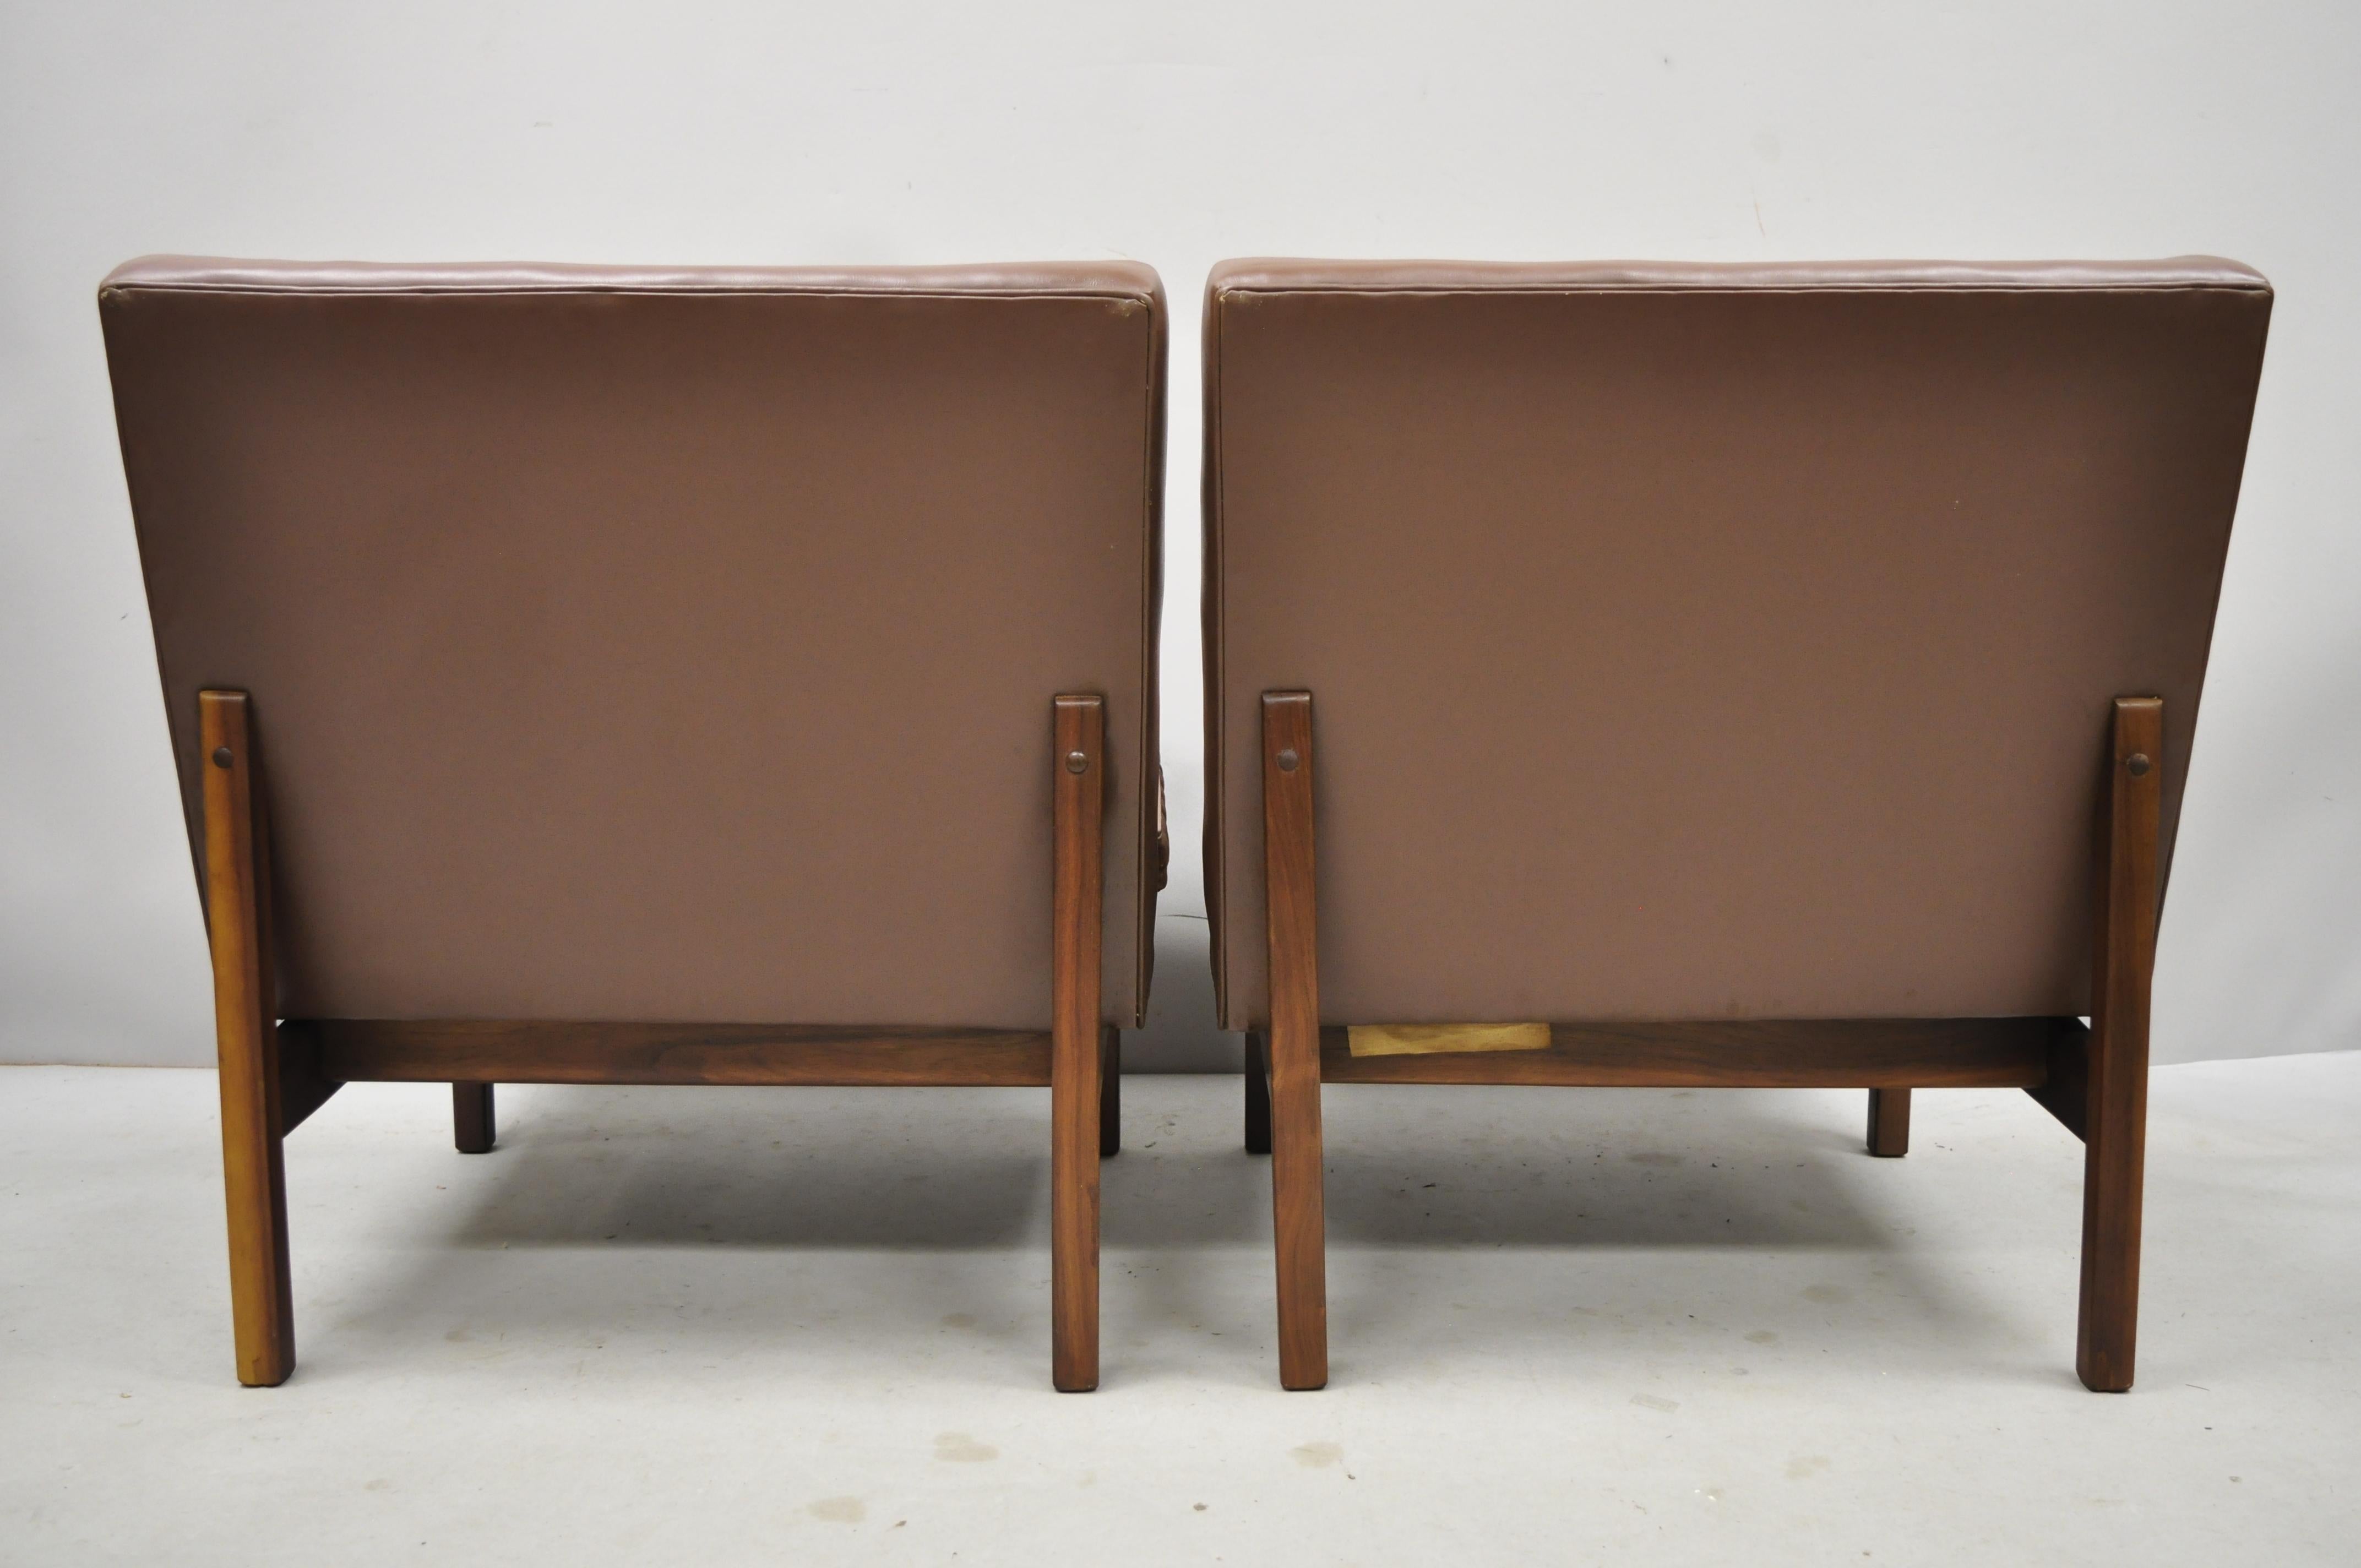 Pair of Milo Baughman for Thayer Coggin Teak and Vinyl Slipper Lounge Chairs In Good Condition For Sale In Philadelphia, PA